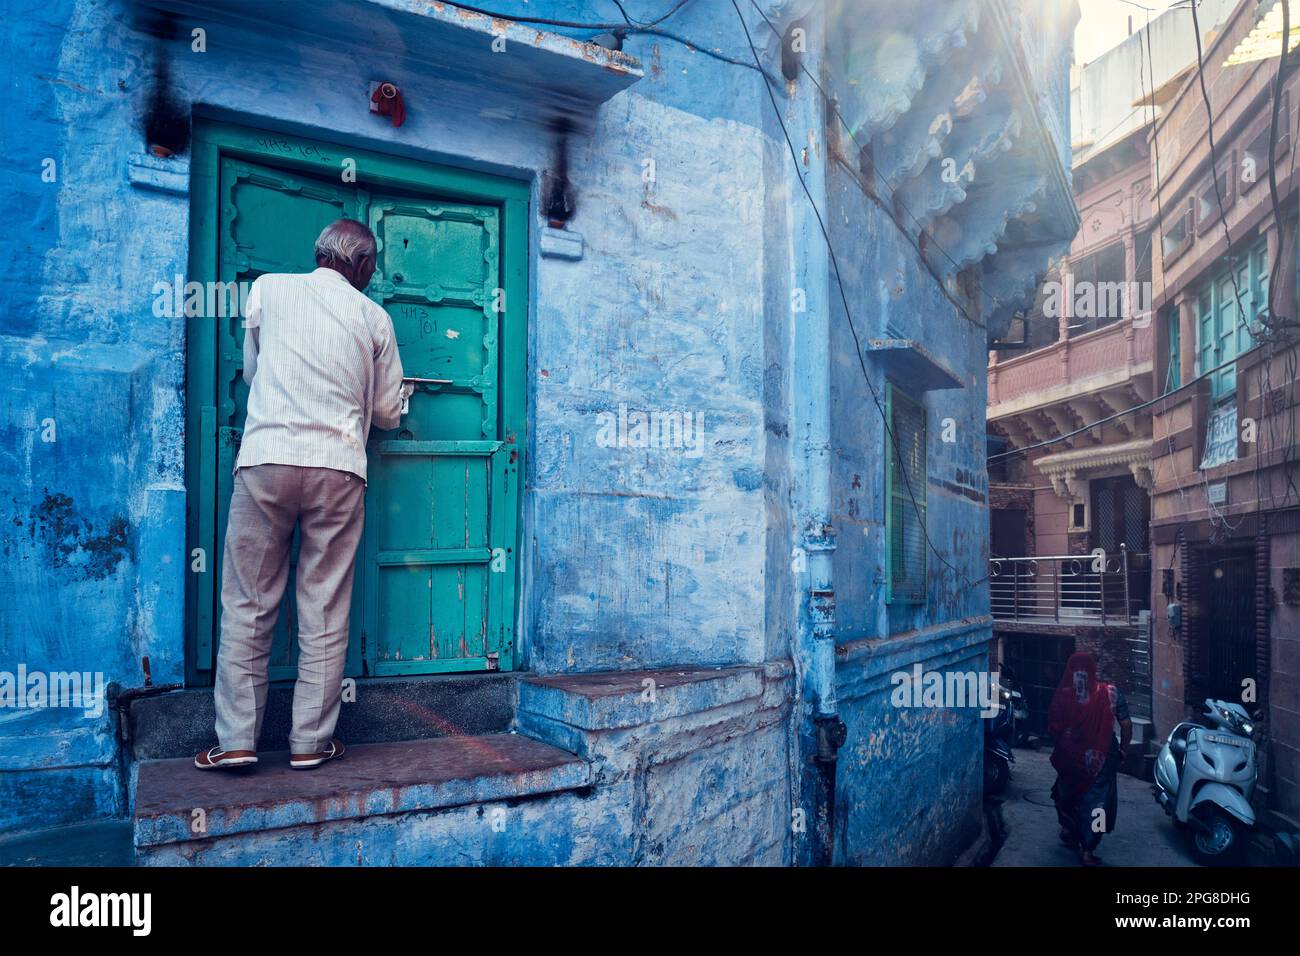 Indian man and his blue house in streets, Jodhpur, Rajasthan, India Stock Photo